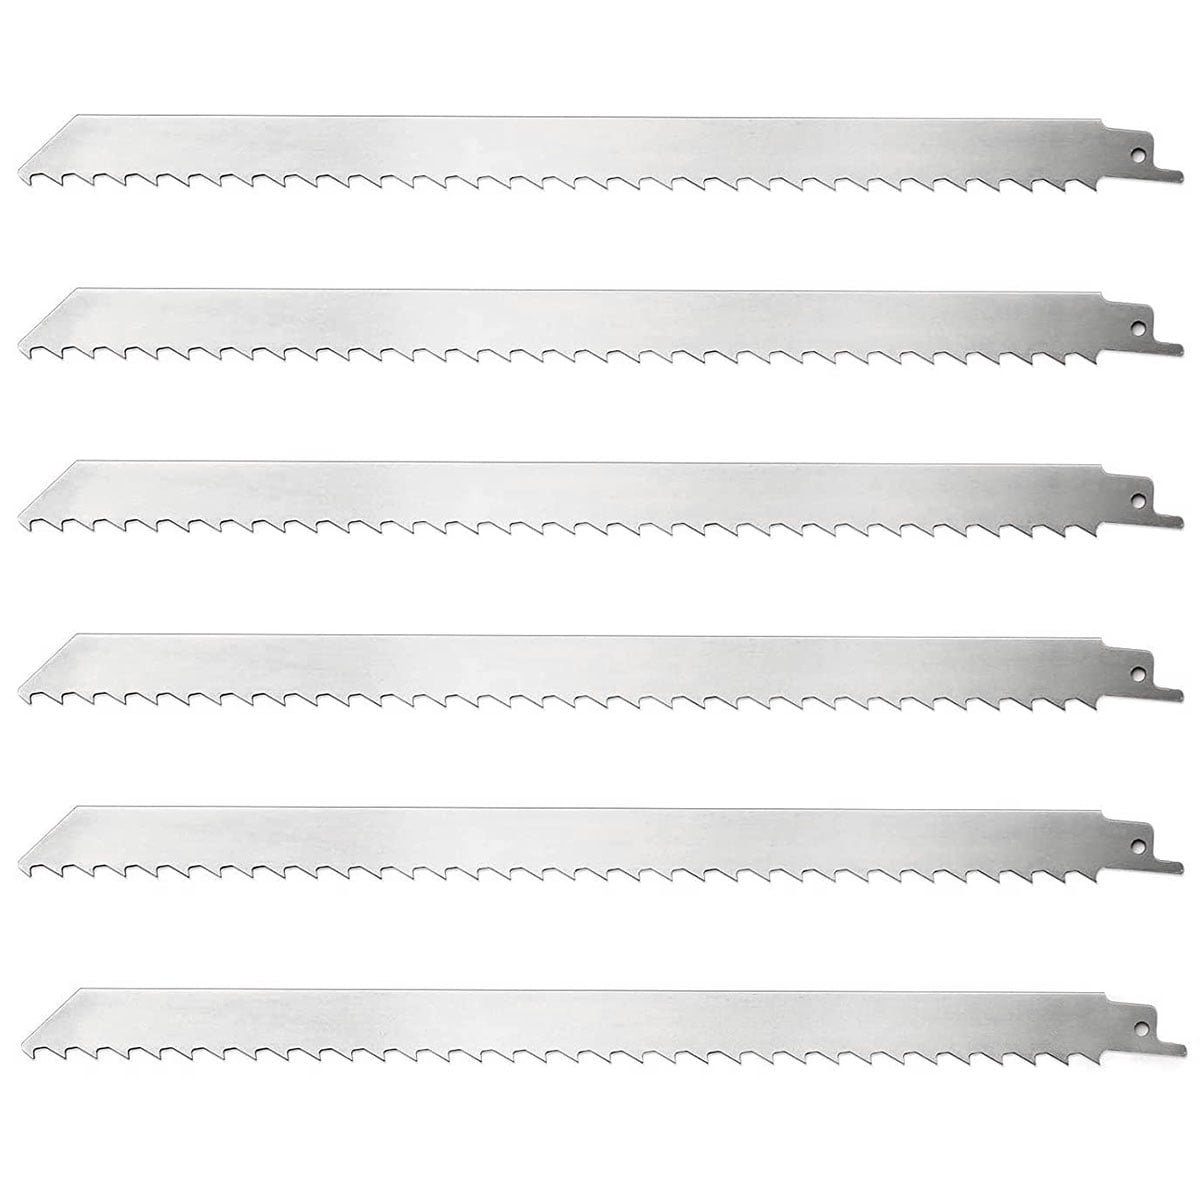 6pcs 300mm Sharp Reciprocating Saw Blade Set For Cutting Ice & Frozen Meat Tool 